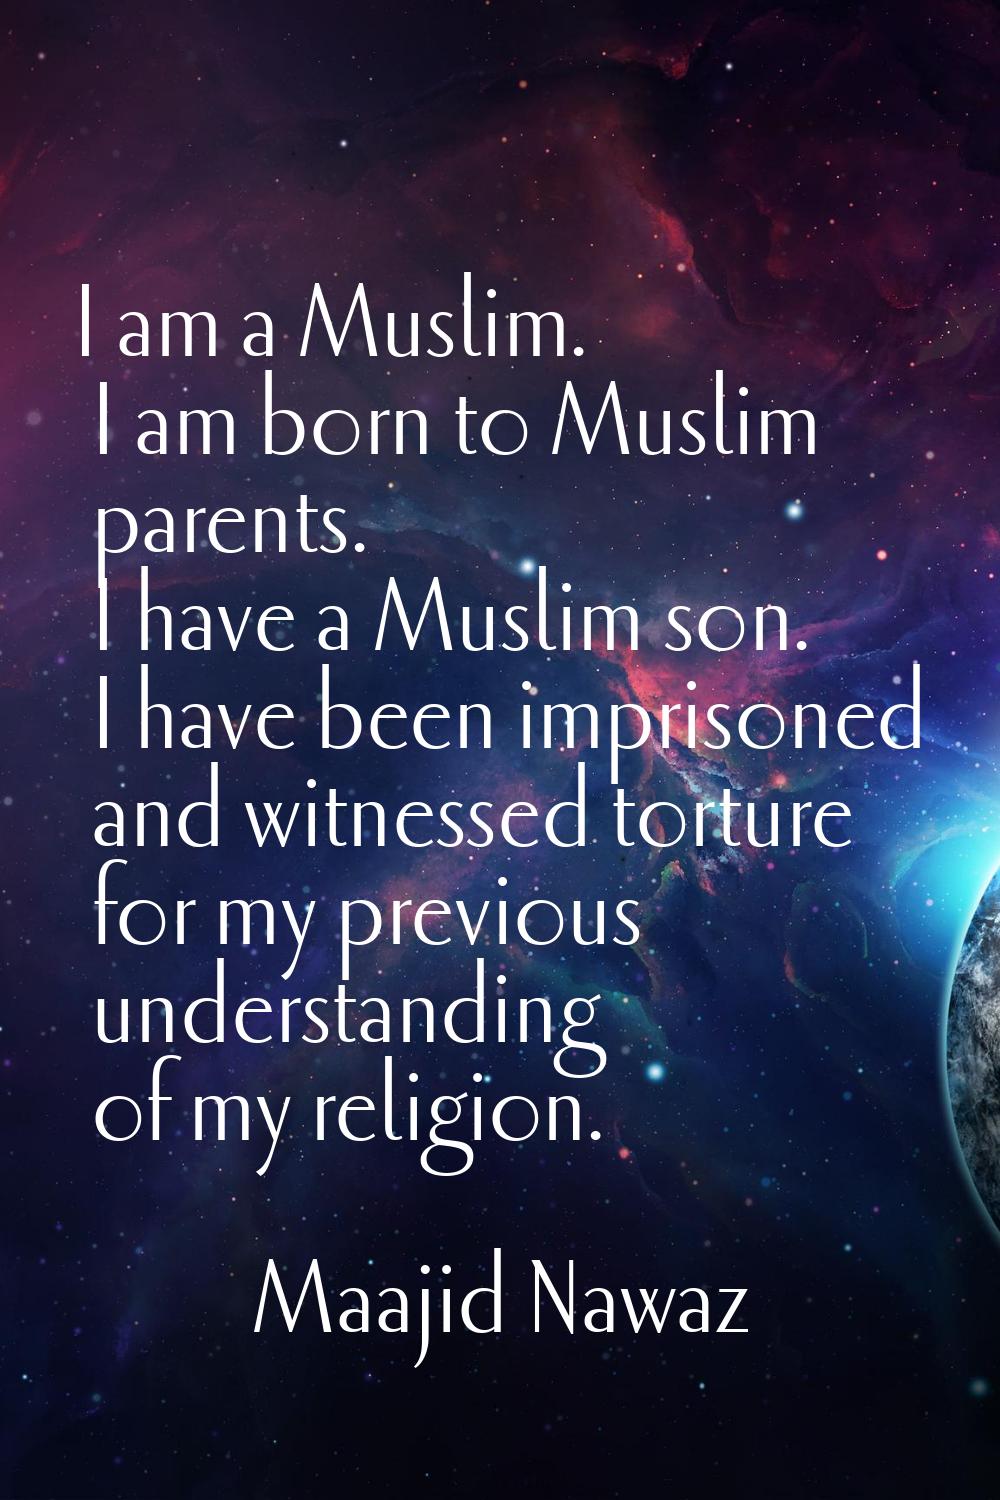 I am a Muslim. I am born to Muslim parents. I have a Muslim son. I have been imprisoned and witness